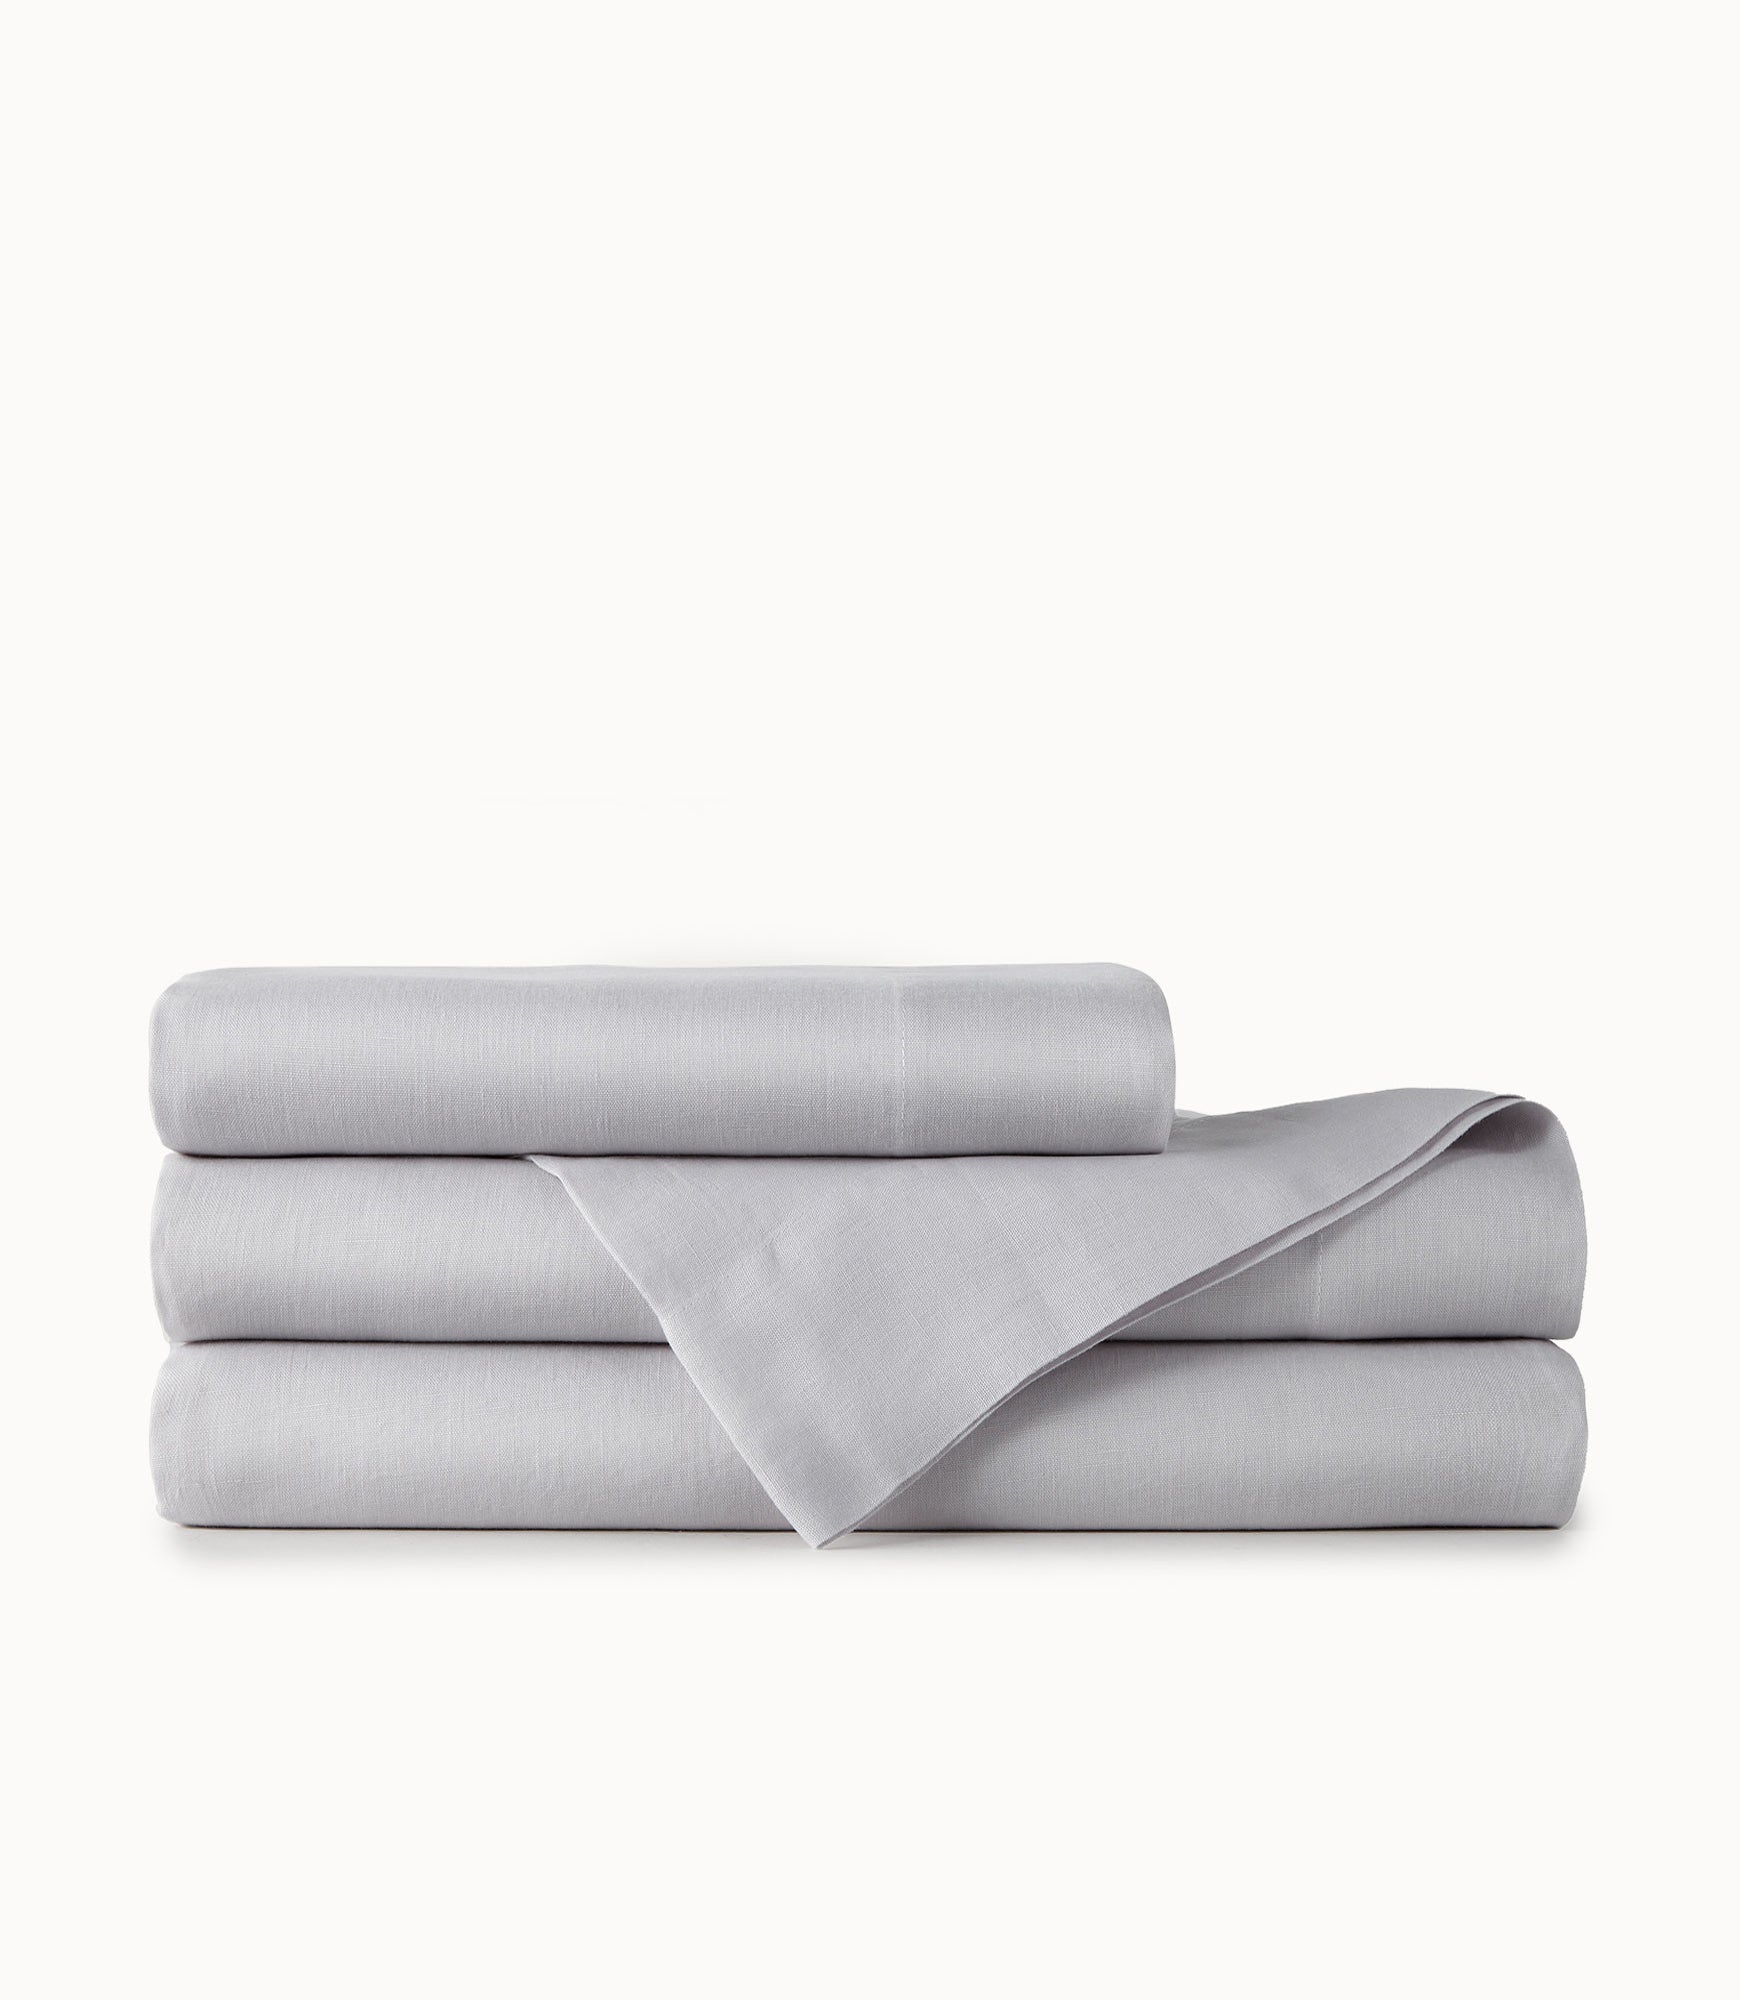 Twin Washed Linen Duvet Cover In Light Grey